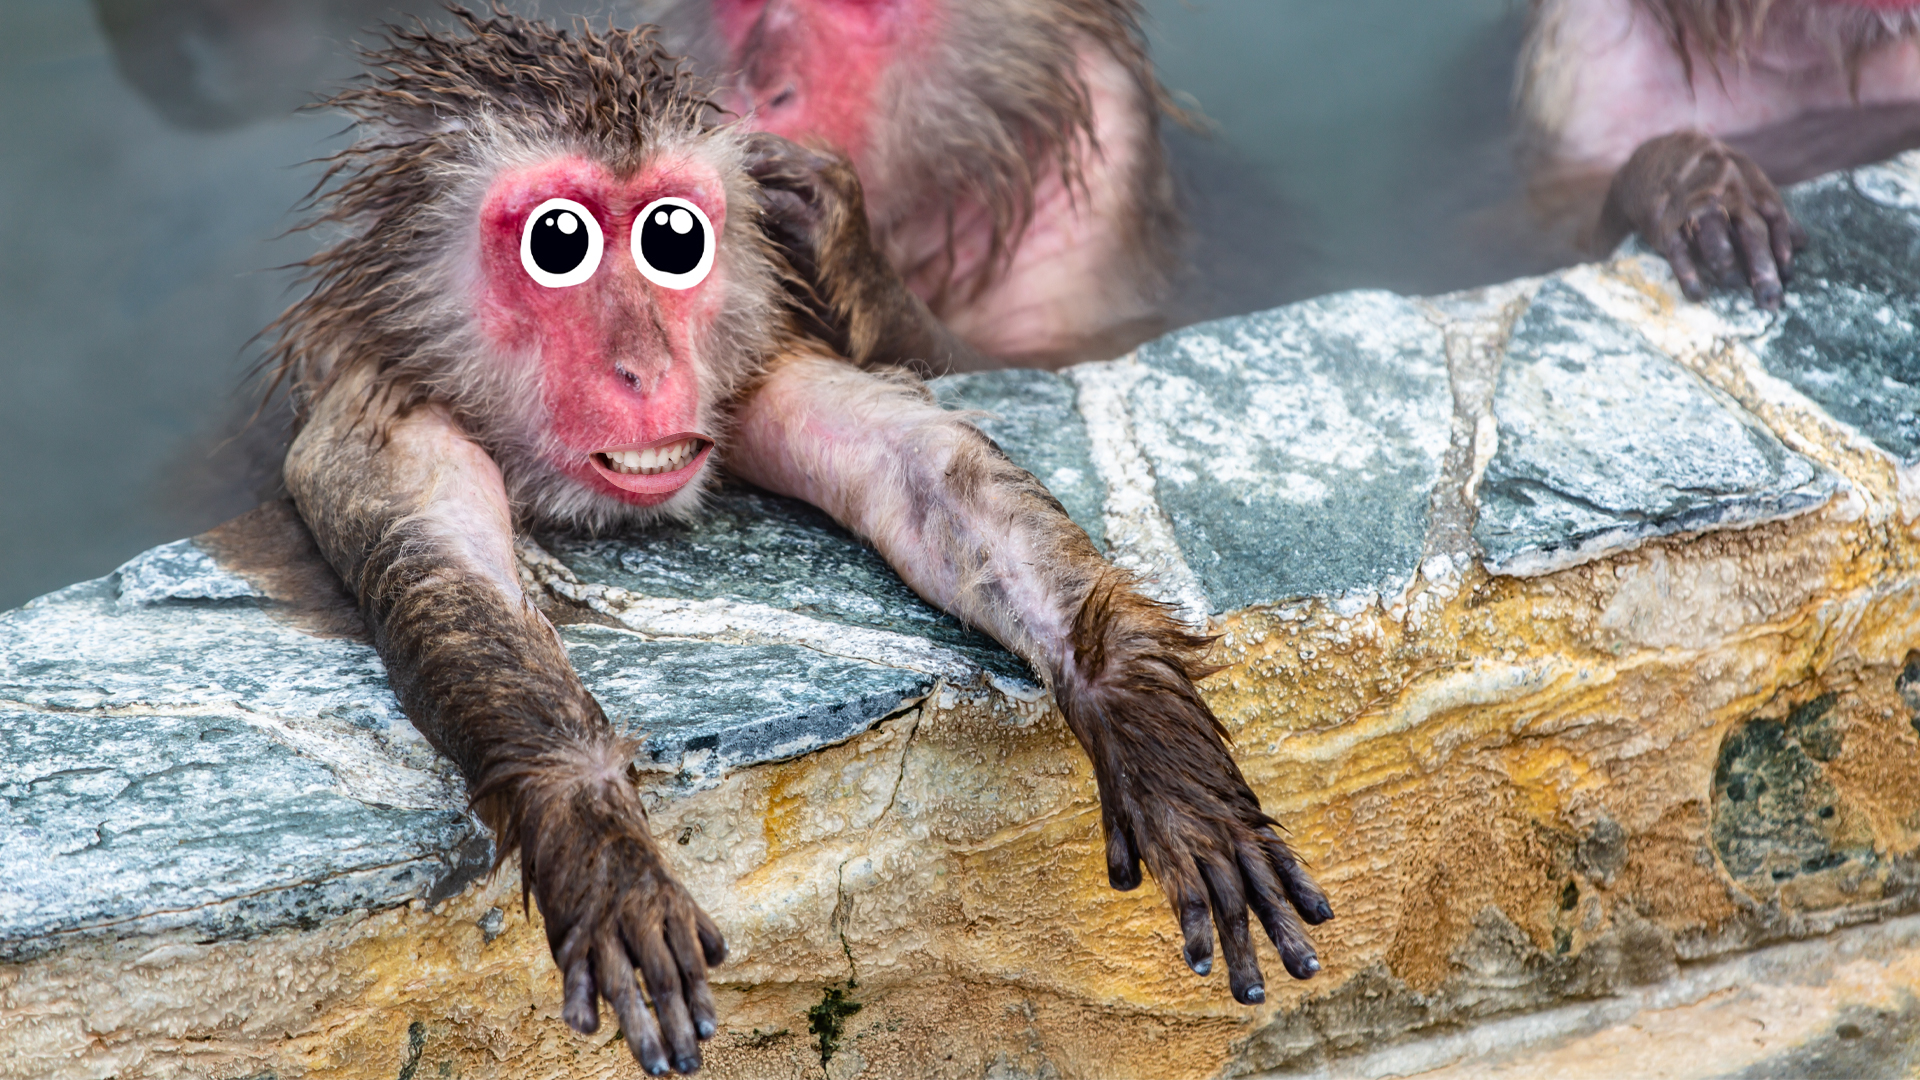 Snow monkeys in a hot spring